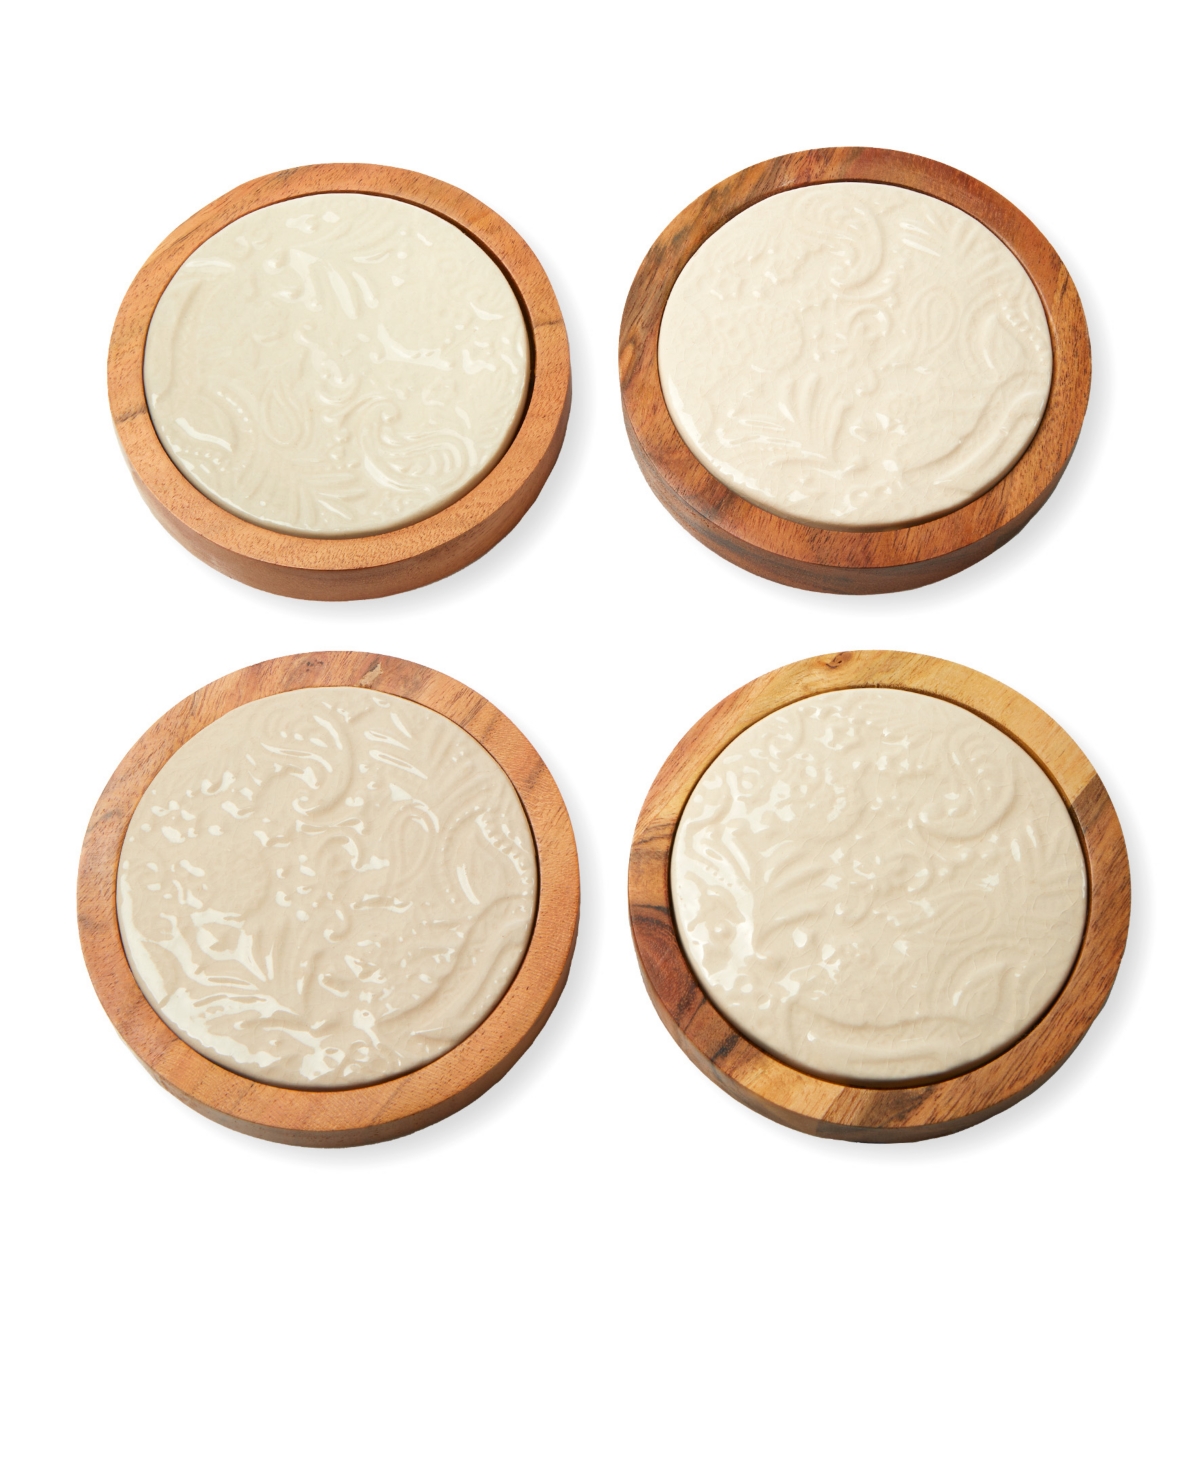 Godinger Acacia Wood Coasters With Floral Designs In Porcelain On Coasters, Set Of 4 In White